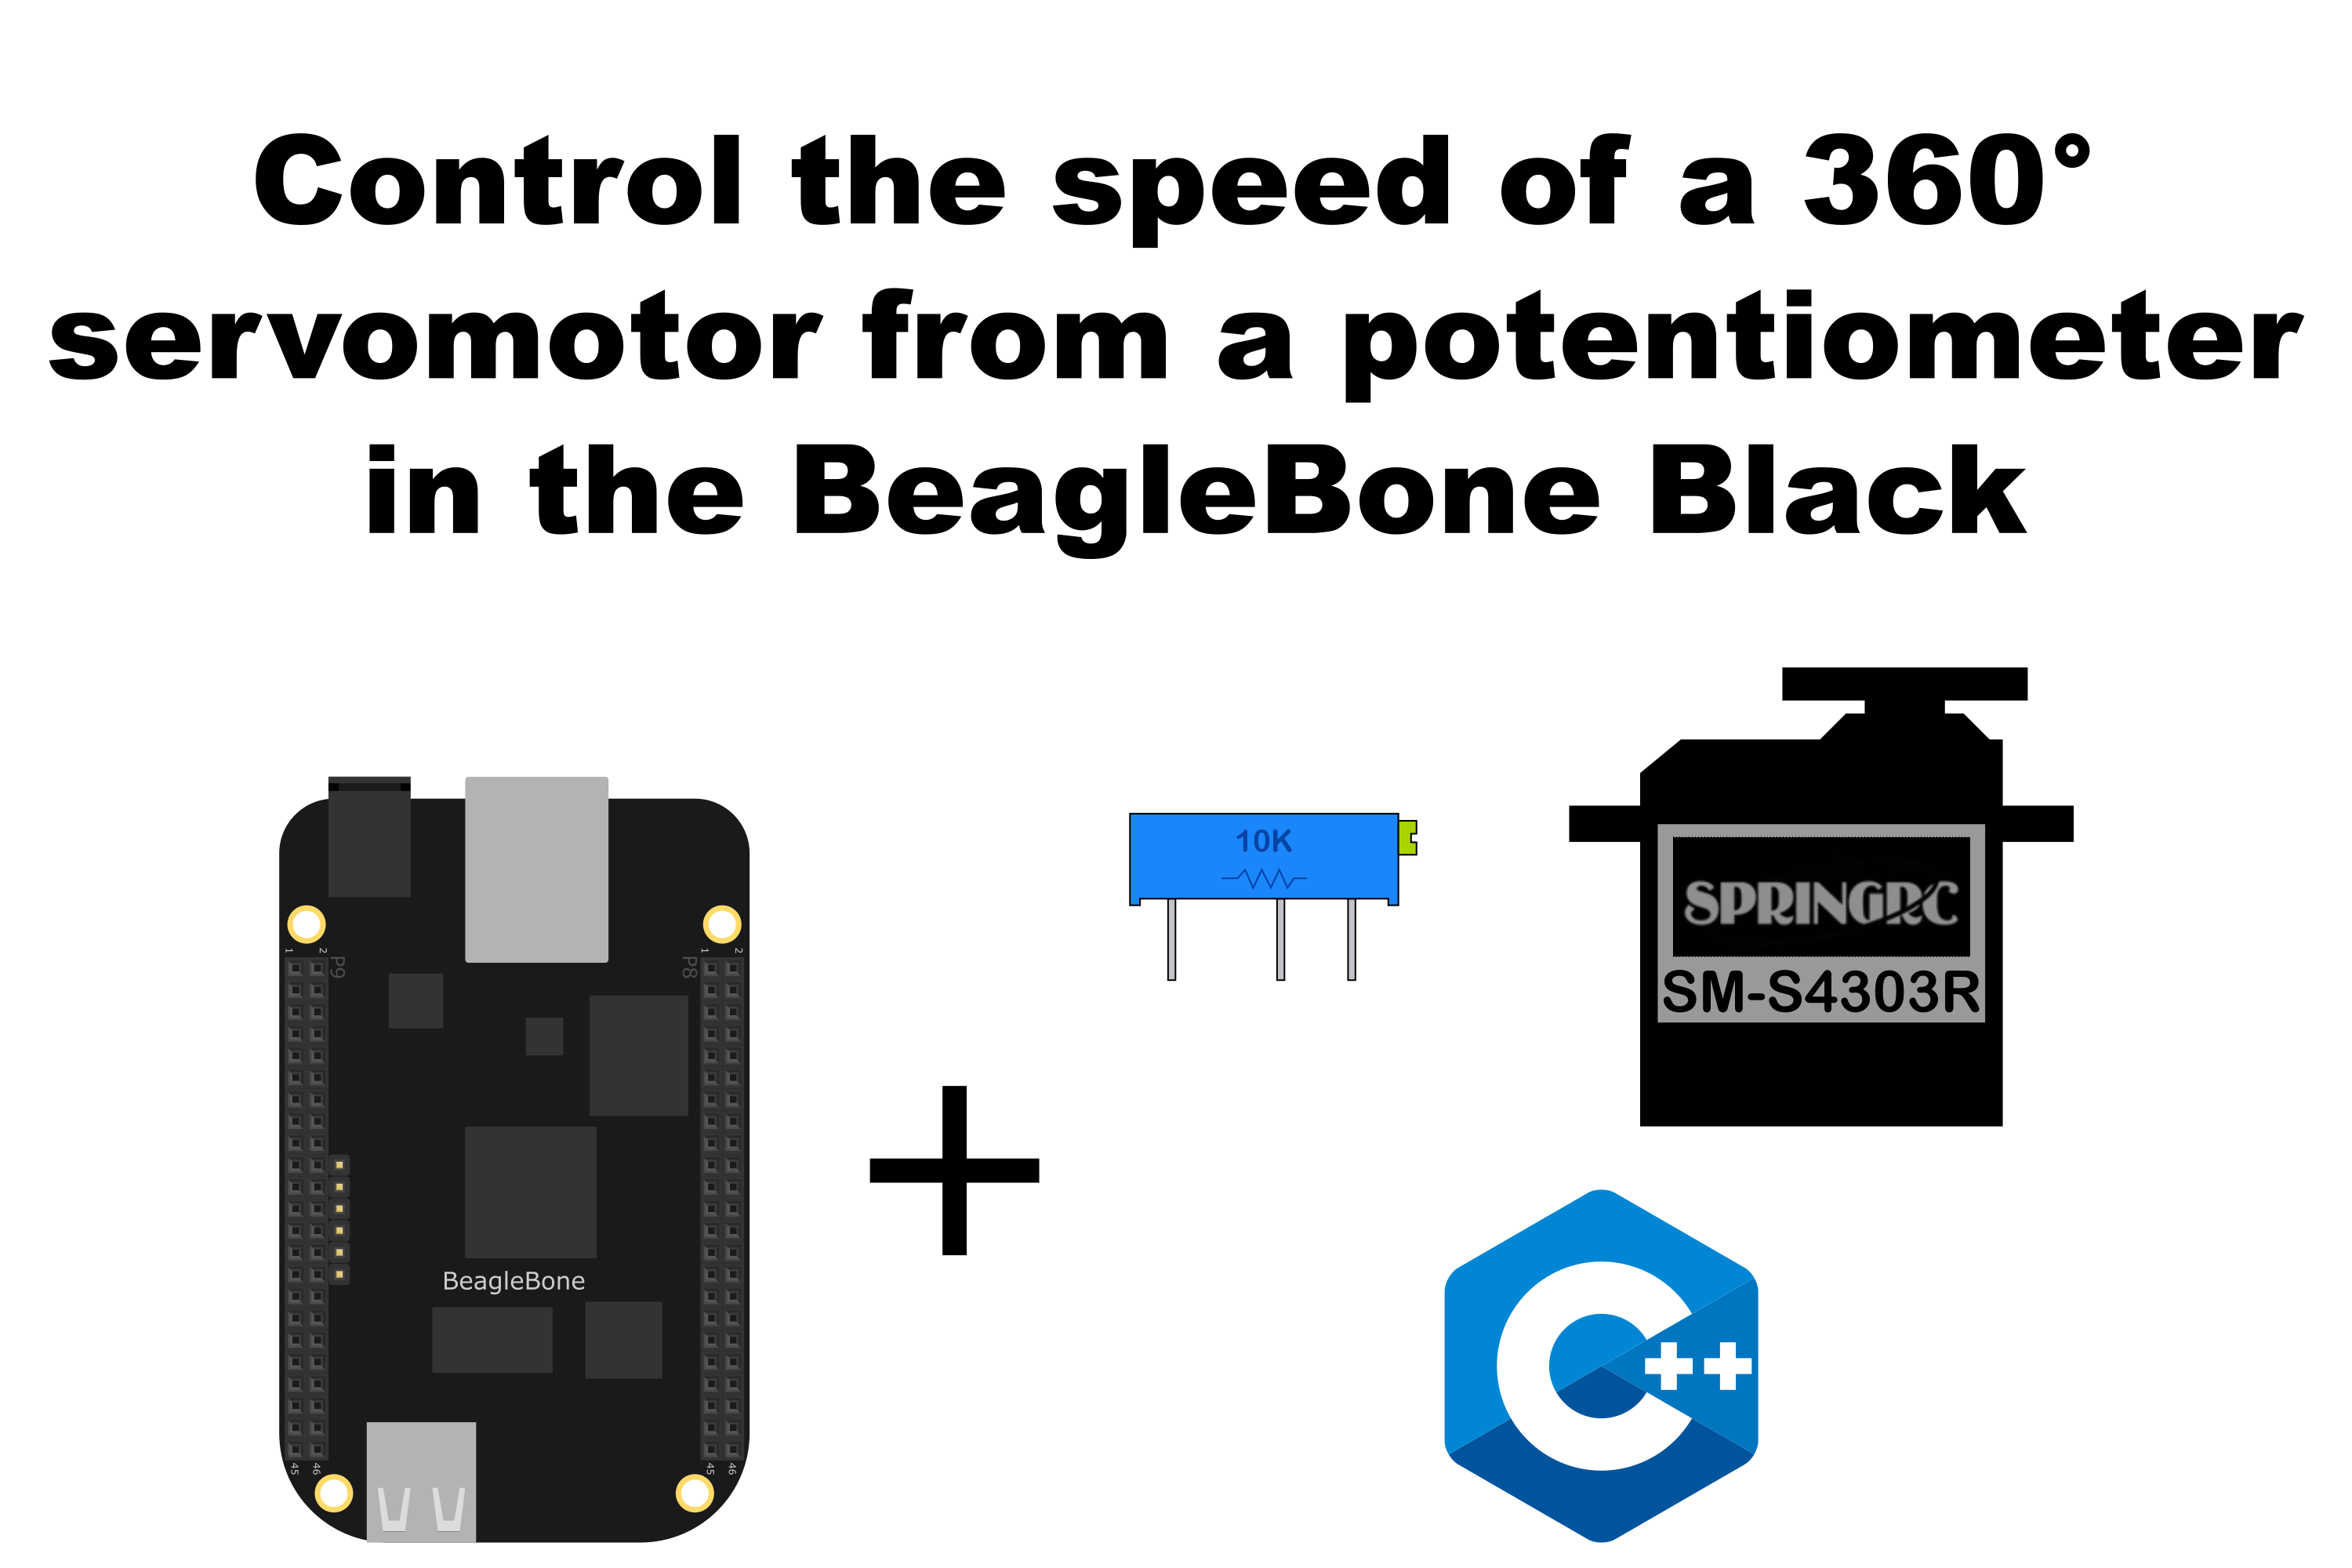 Control the speed of a 360° servomotor from a potentiometer in the BeagleBone Black